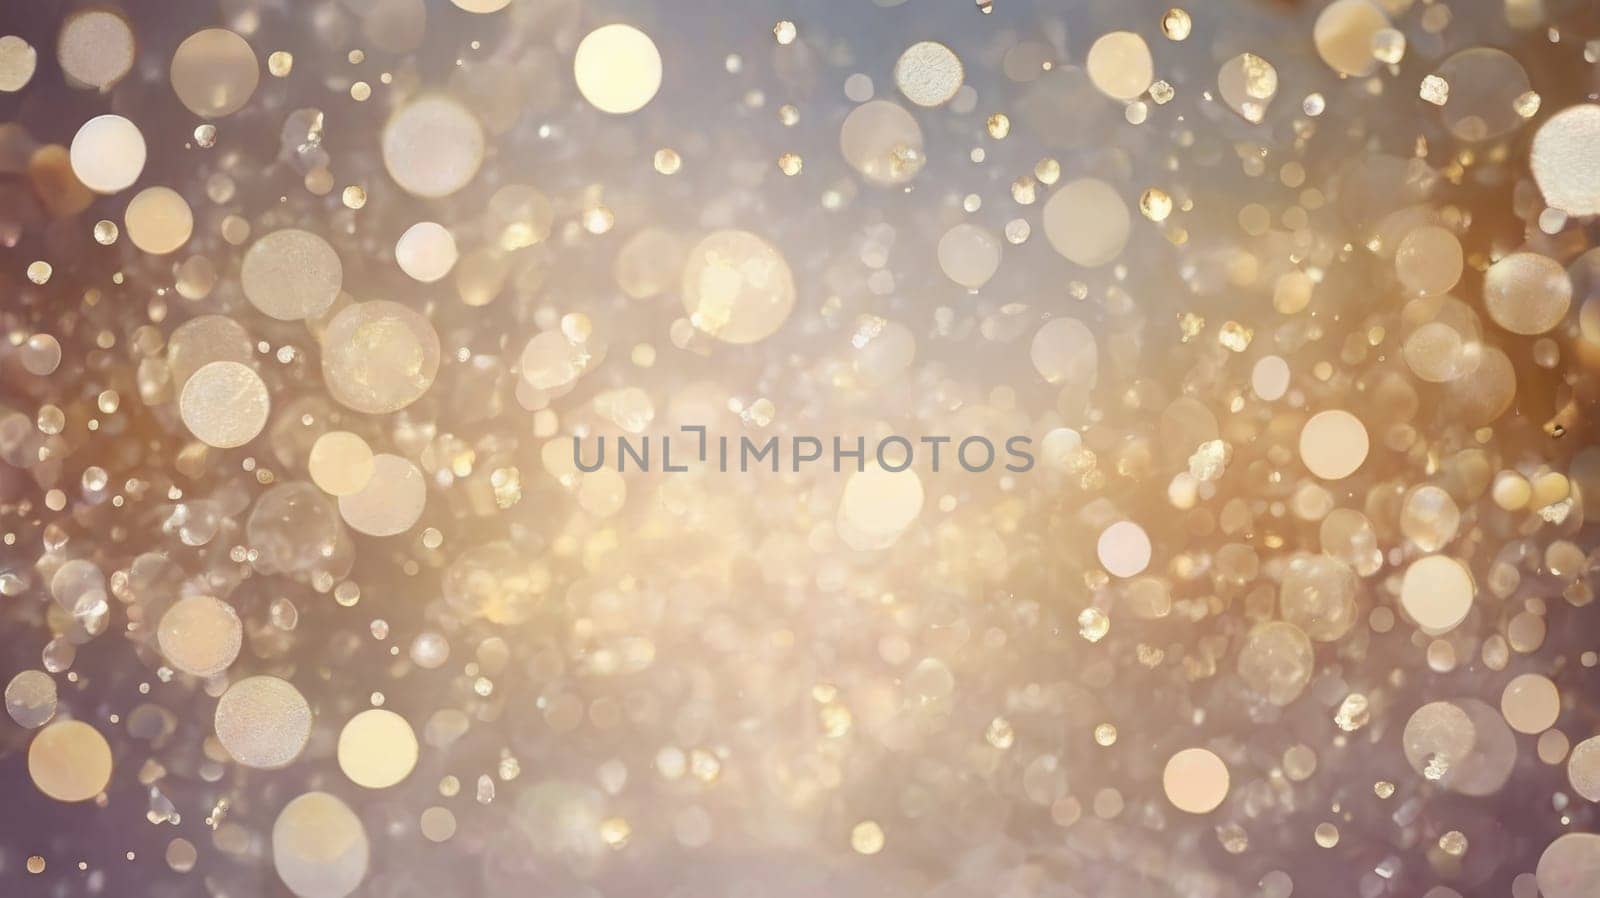 Blurred glitter effects background. Bright soft blue with hints of pearl color. Christmas background by Ekaterina34